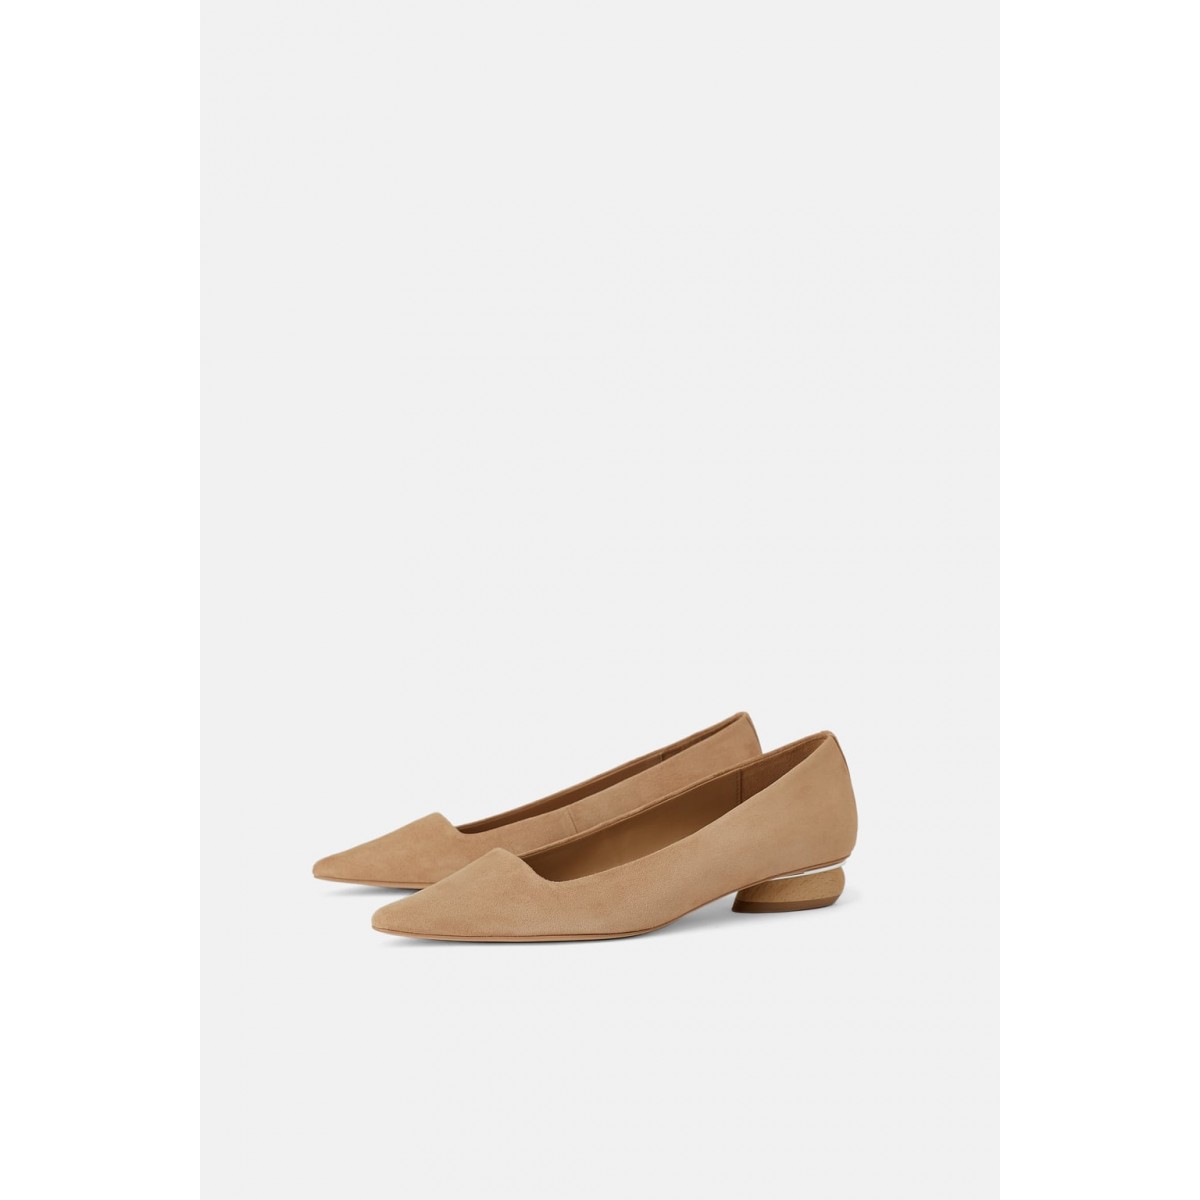 Zara Leather flat shoes with wood effect heel